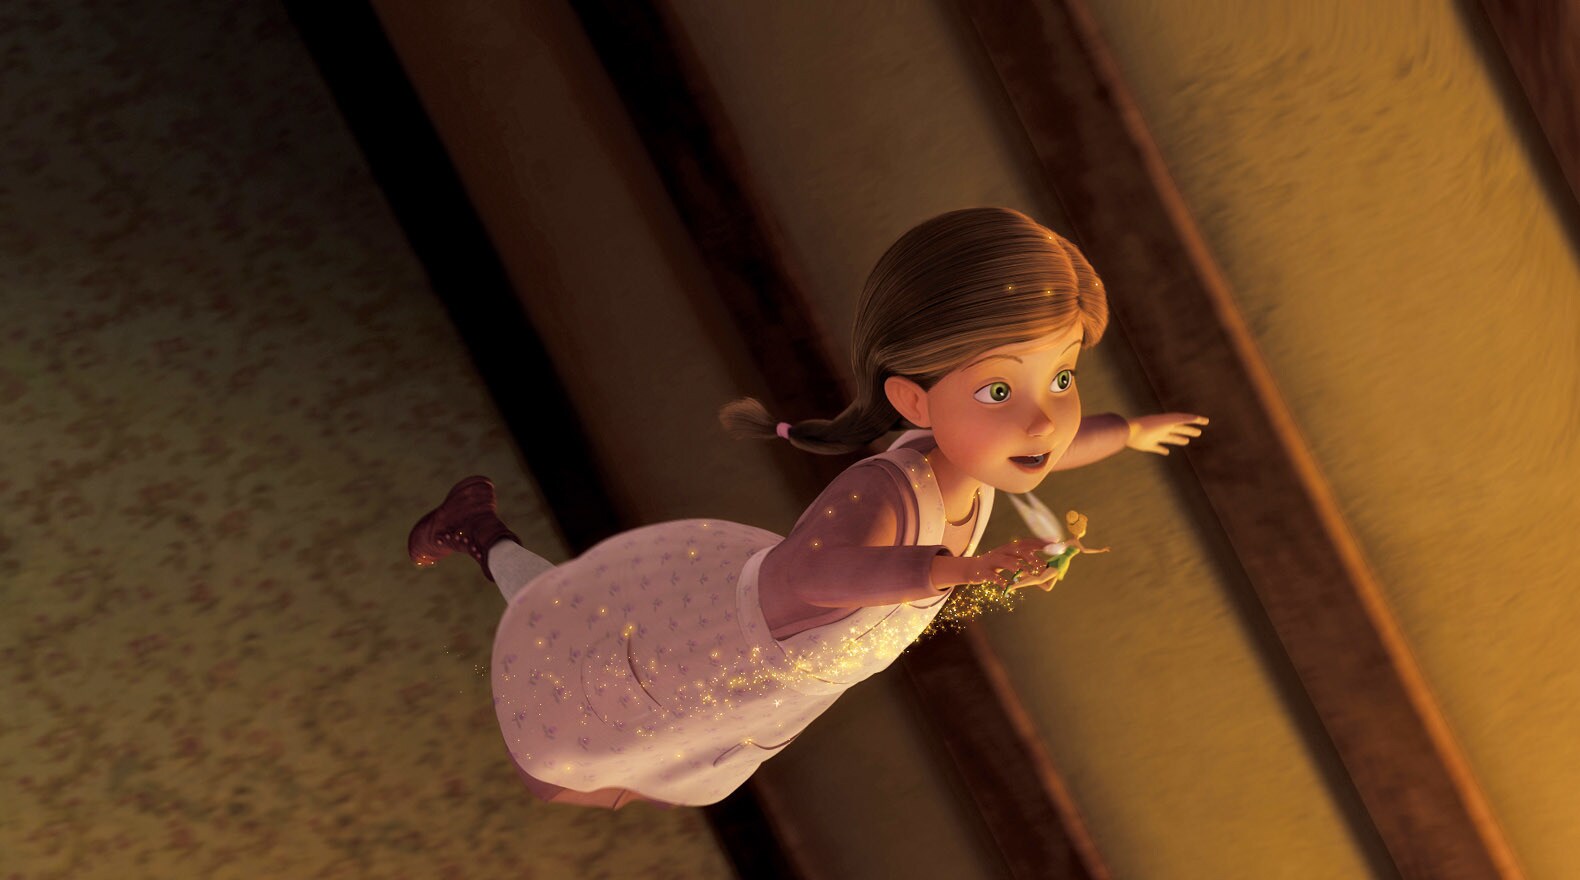 With a little pixie dust, Lizzy flies around her room.